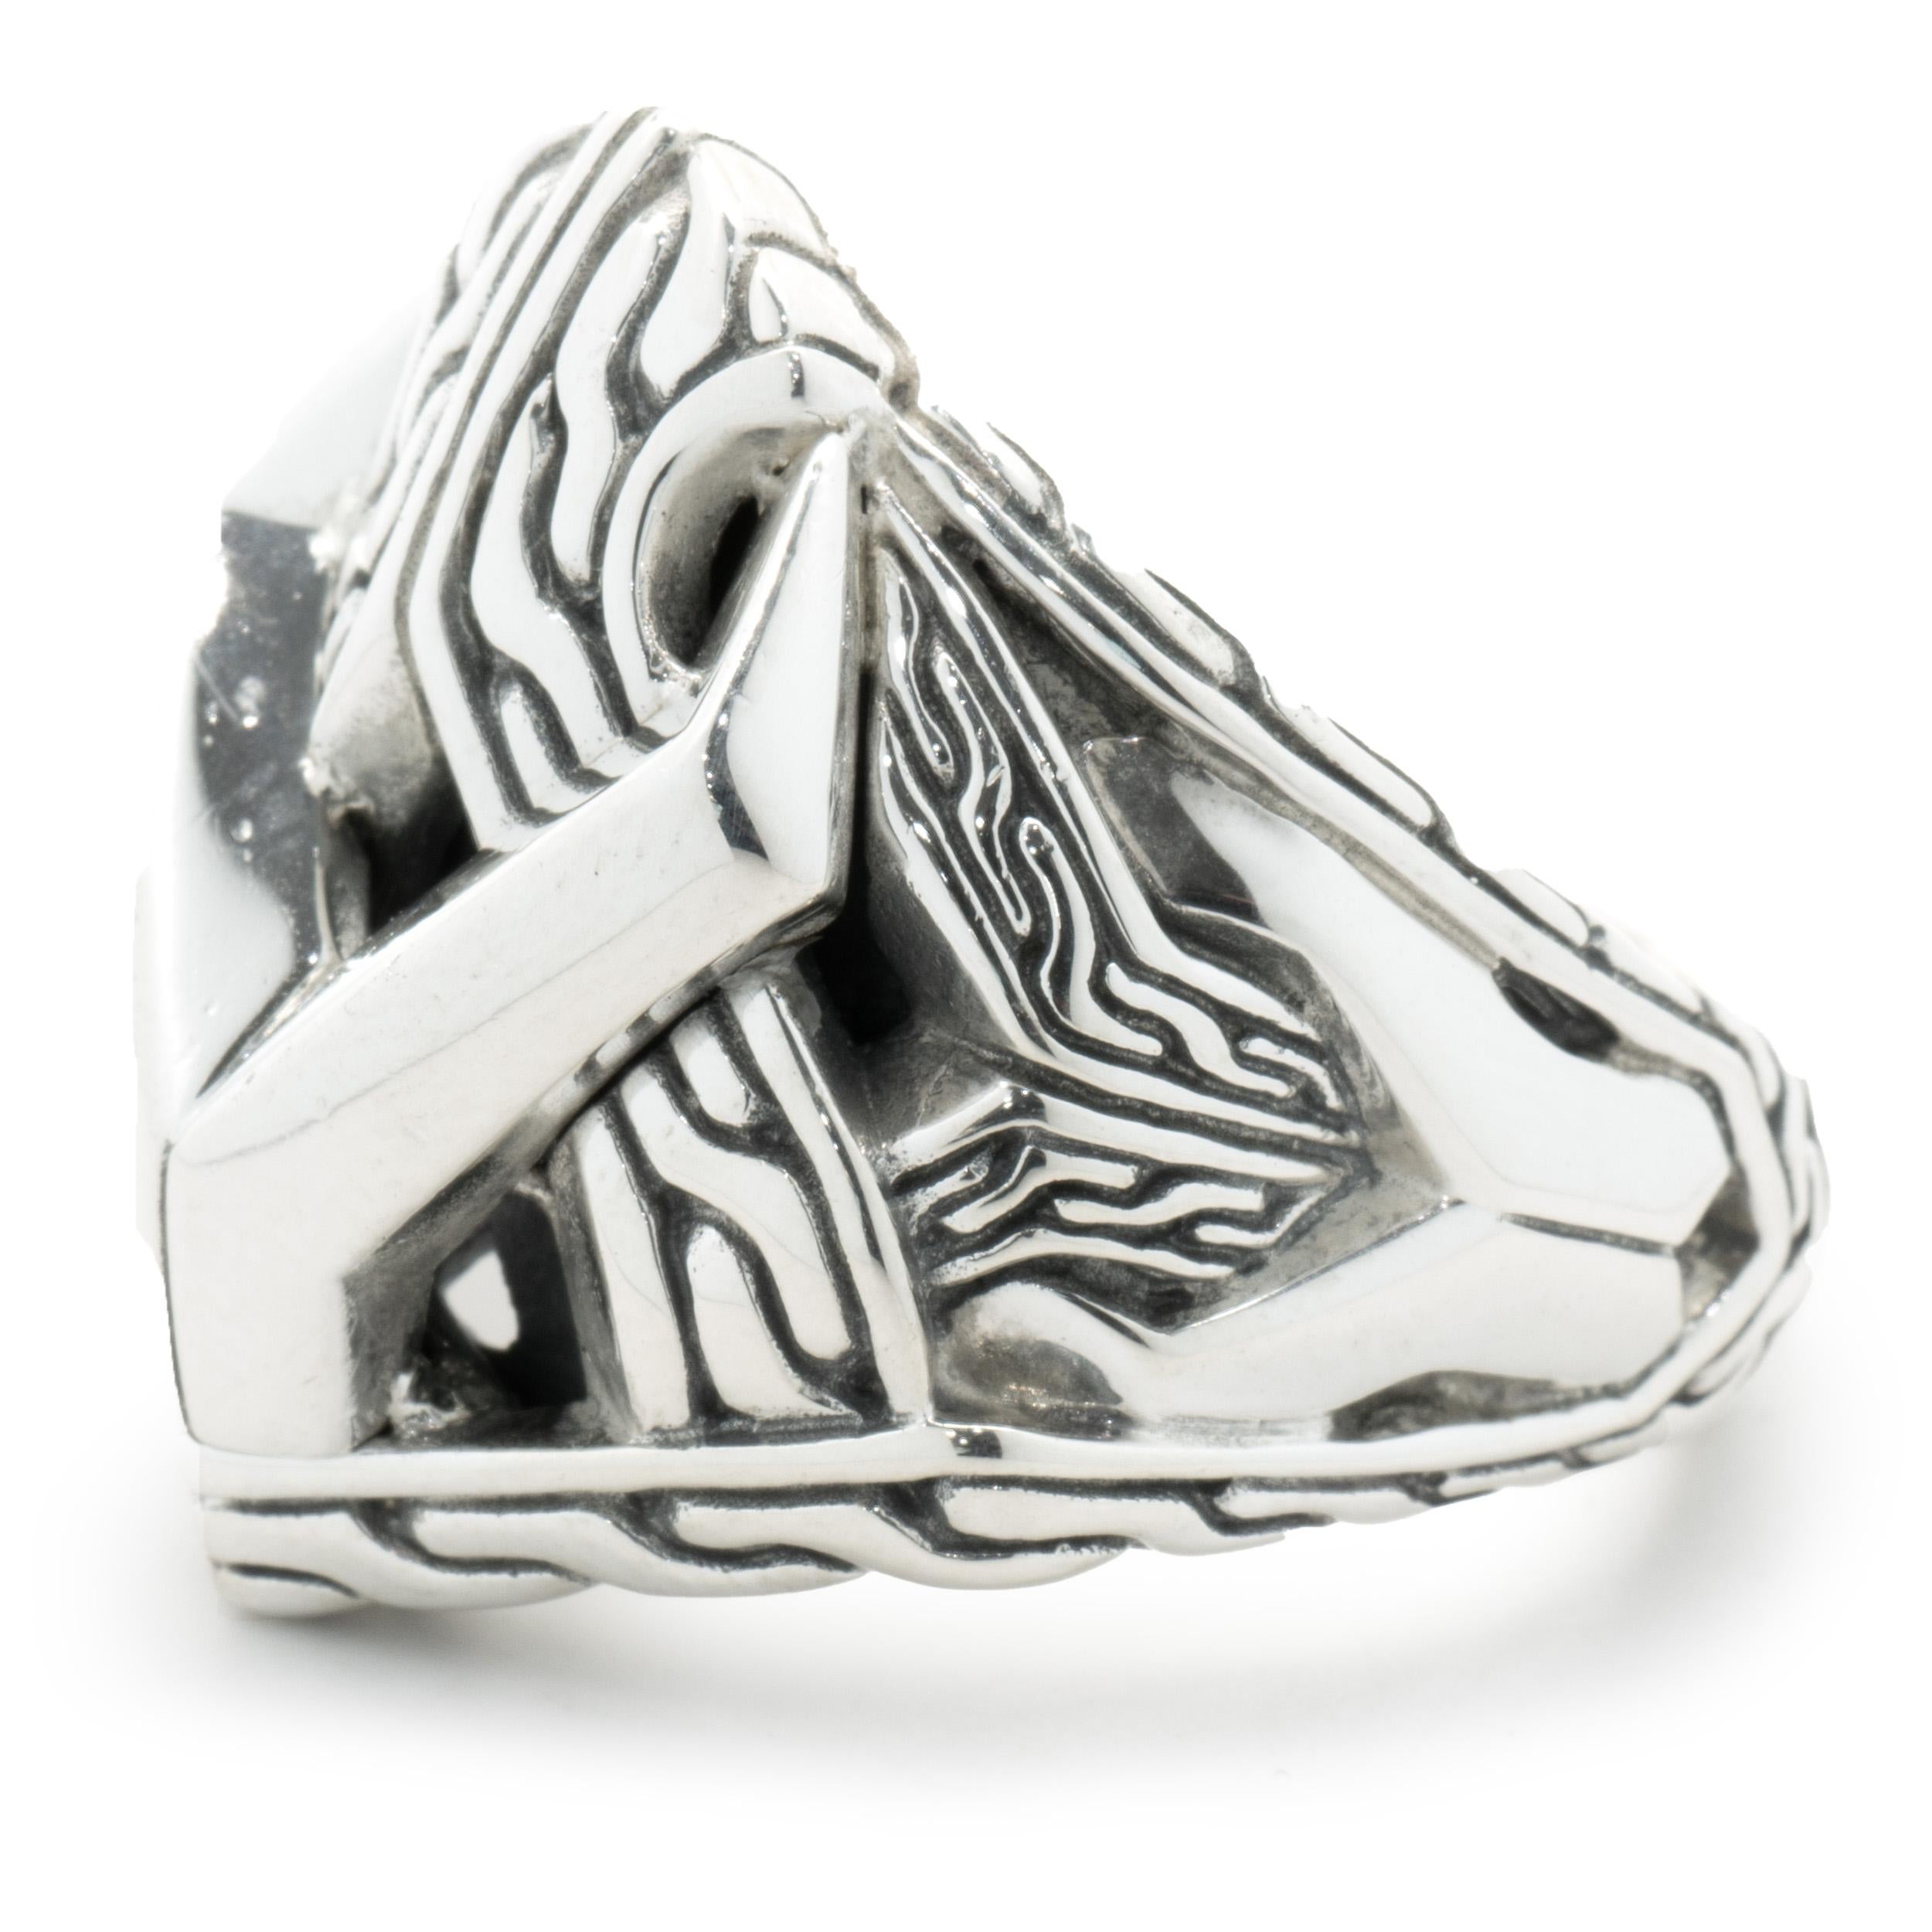 Designer: John Hardy
Material: Sterling Silver 
Dimensions: ring top measures 24.5mm wide
Weight: 17.55 grams
